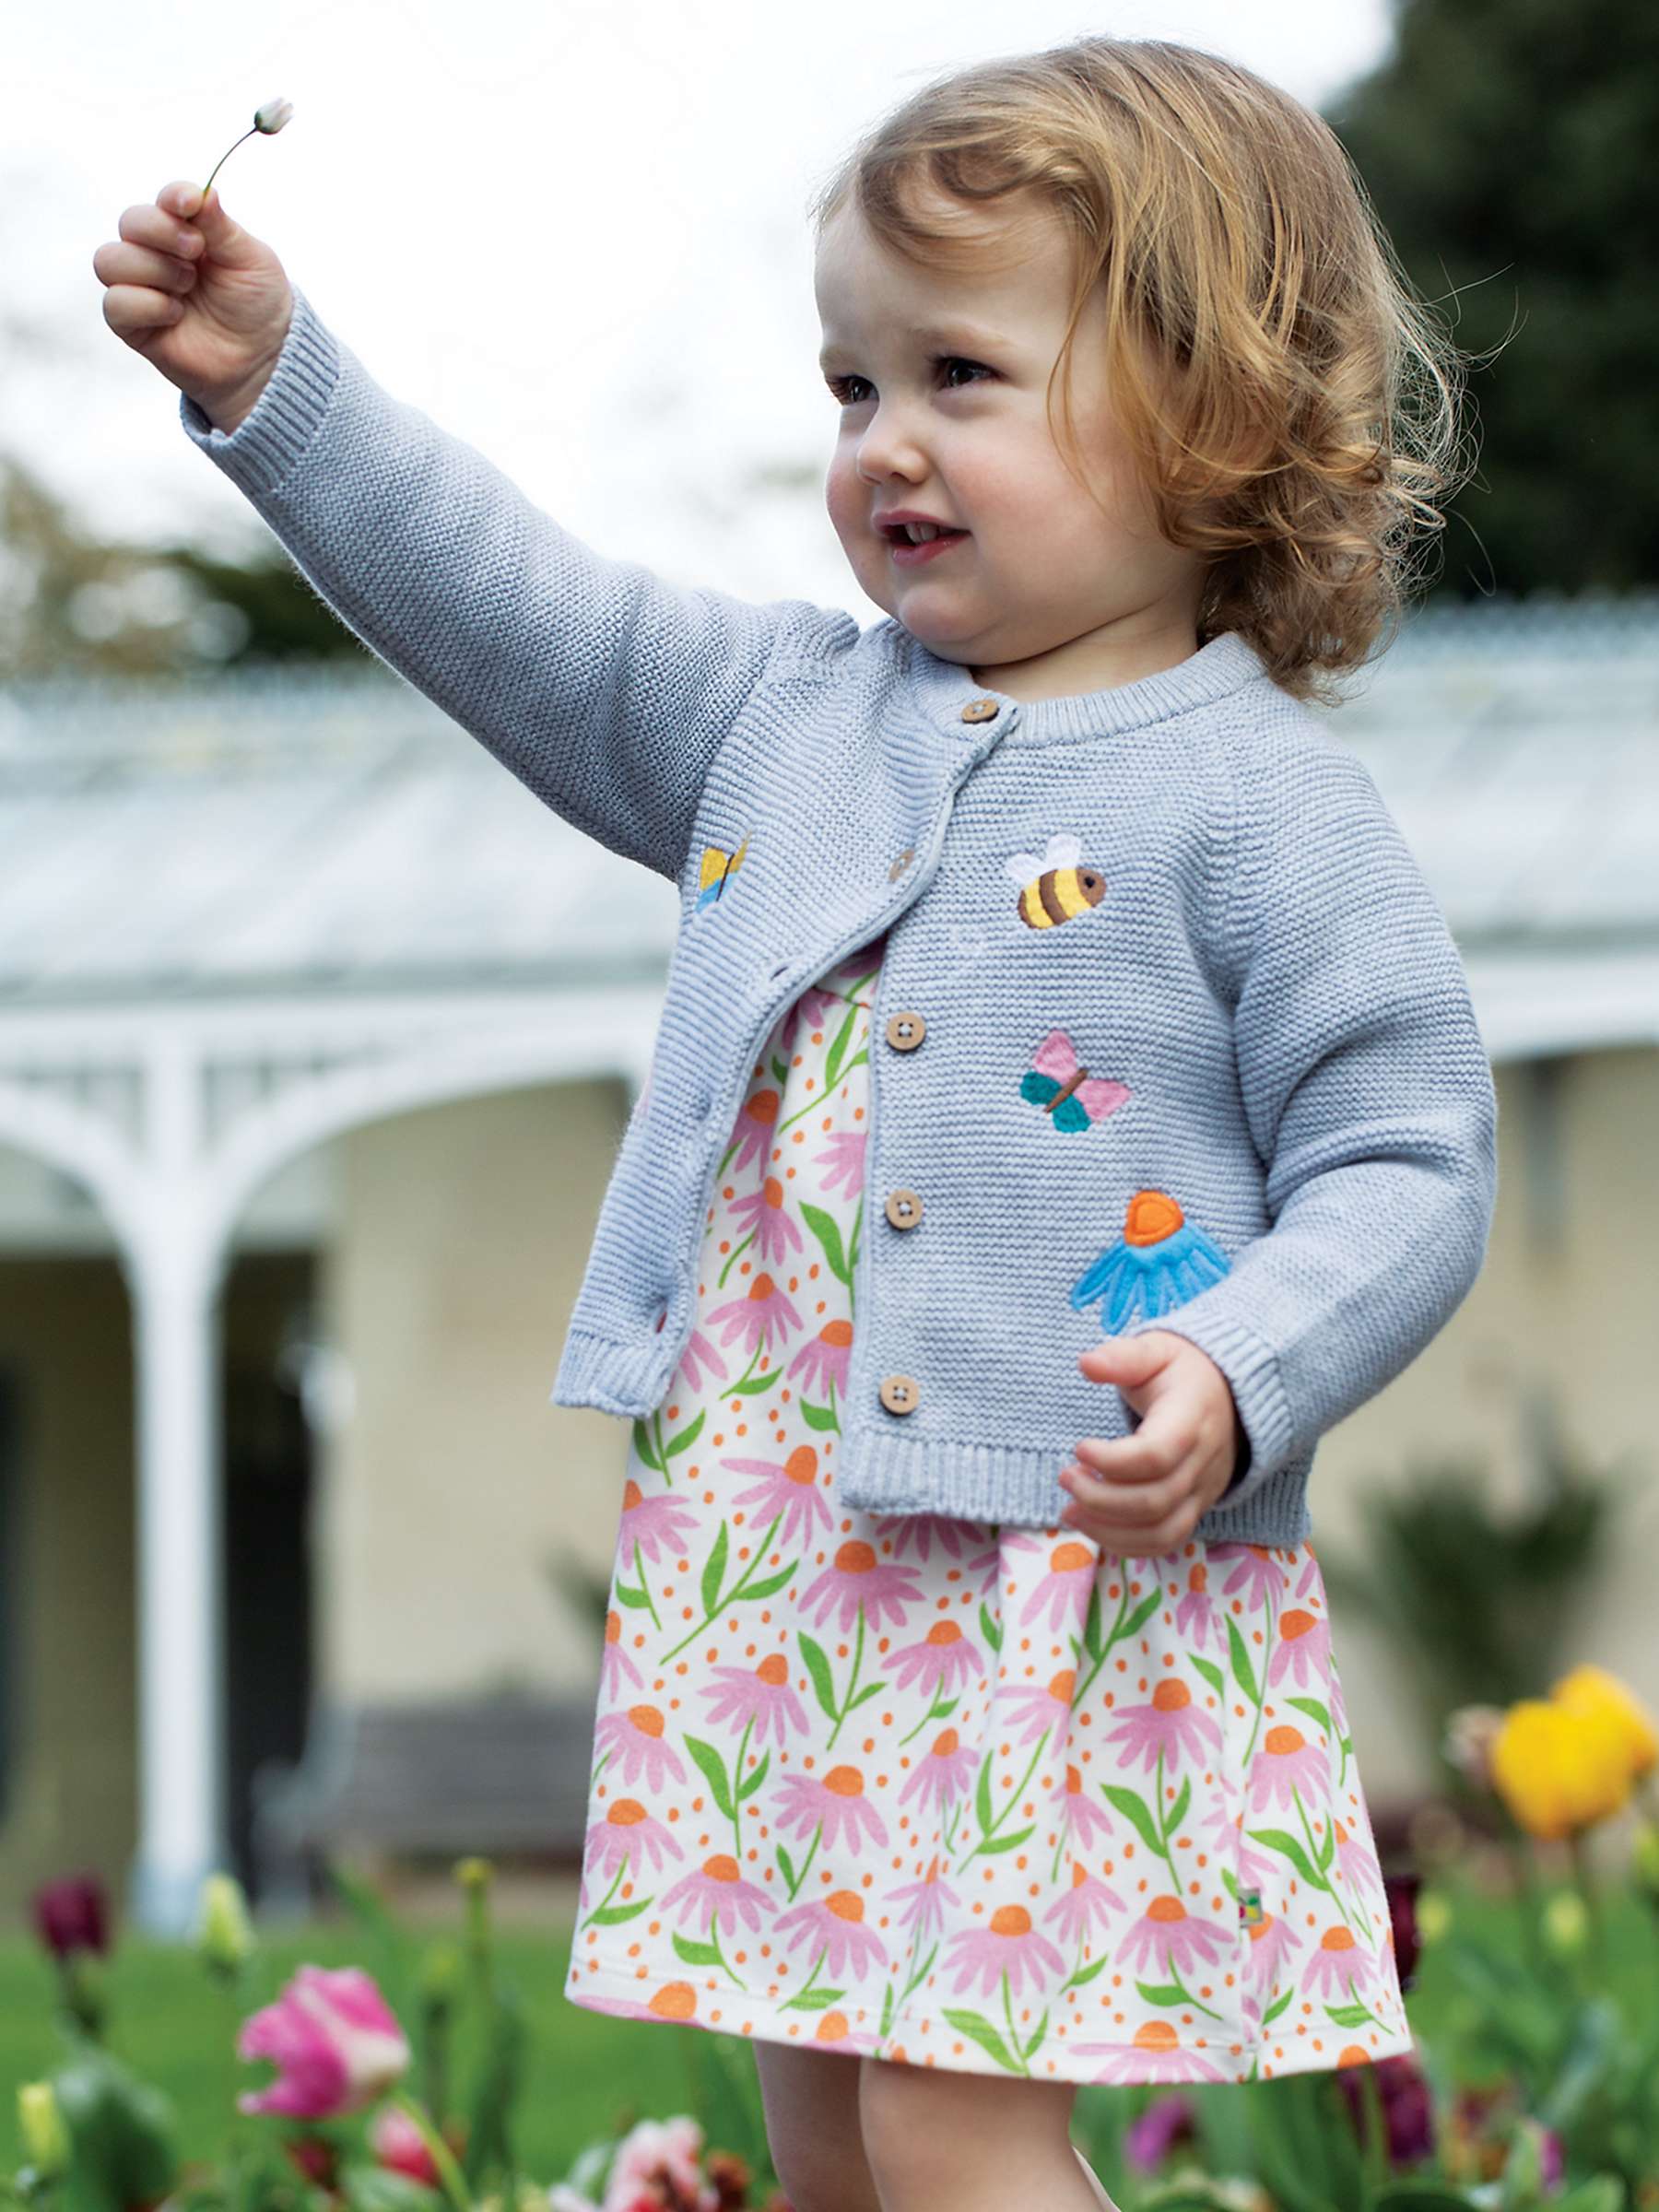 Buy Frugi Baby Organic Cotton Colby Knit Floral Applique Cardigan, Grey Marl Online at johnlewis.com